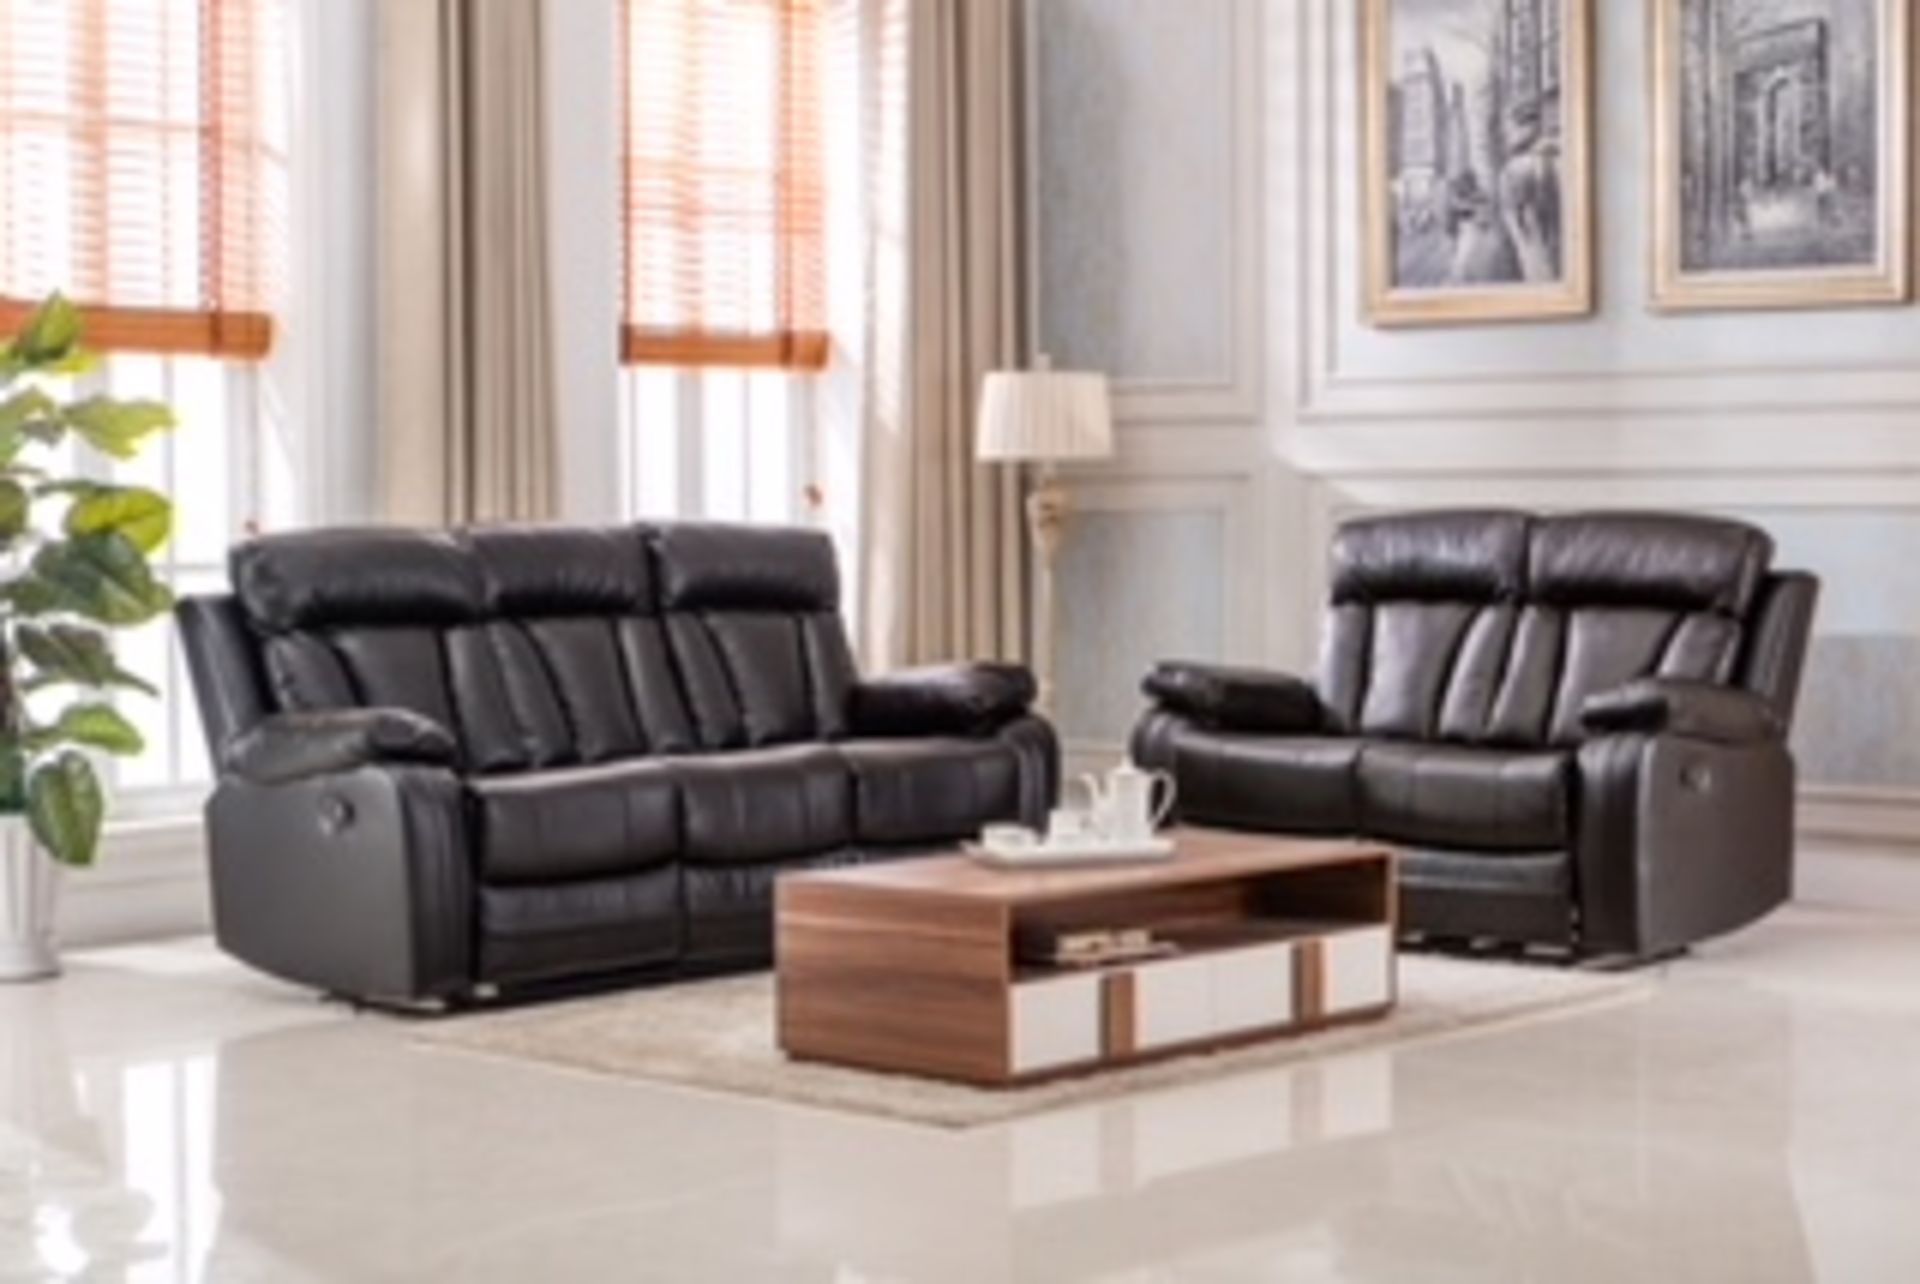 Brand New Boxed 3 Seater Plus 2 Seater Manhattan Black Leather Manual Reclining Sofas - Image 2 of 2